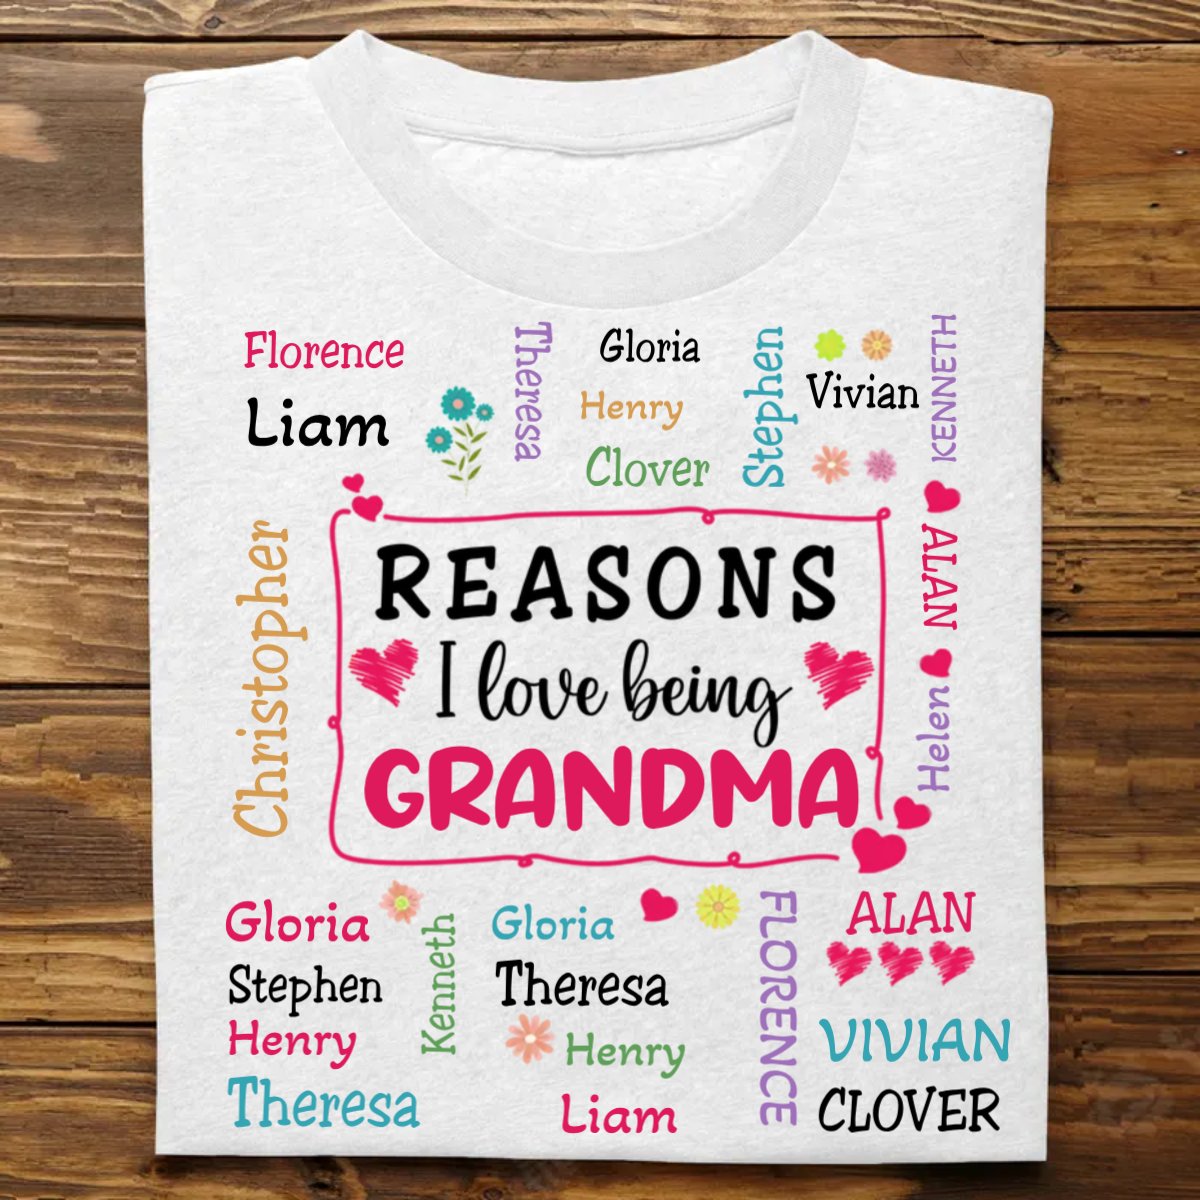 Discover Family - Reasons I Love Being Grandma - Personalized Unisex T-shirt